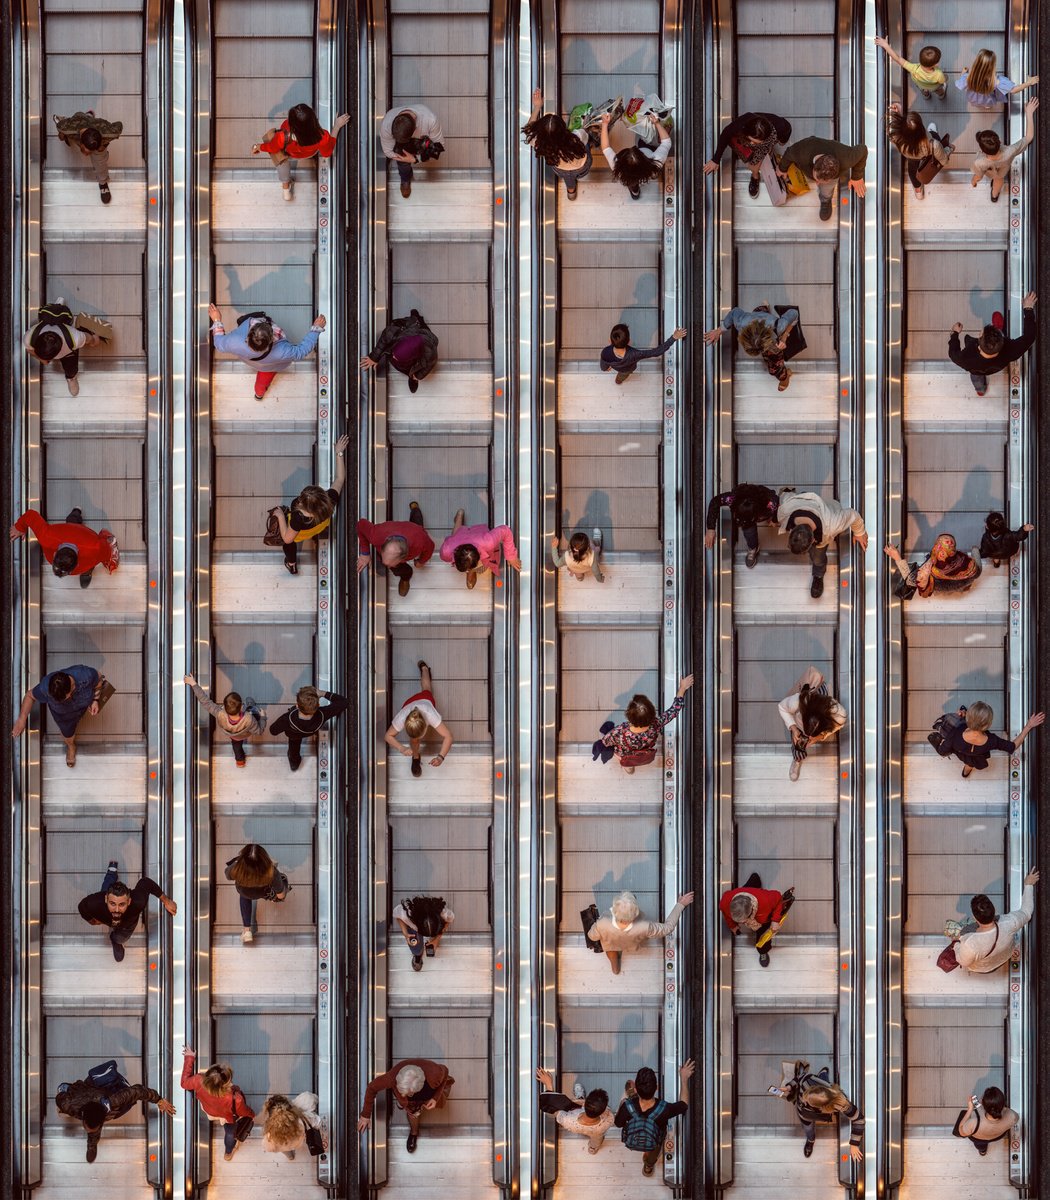 The World From Above - Up and Down (2/10) by Werner Roelandt